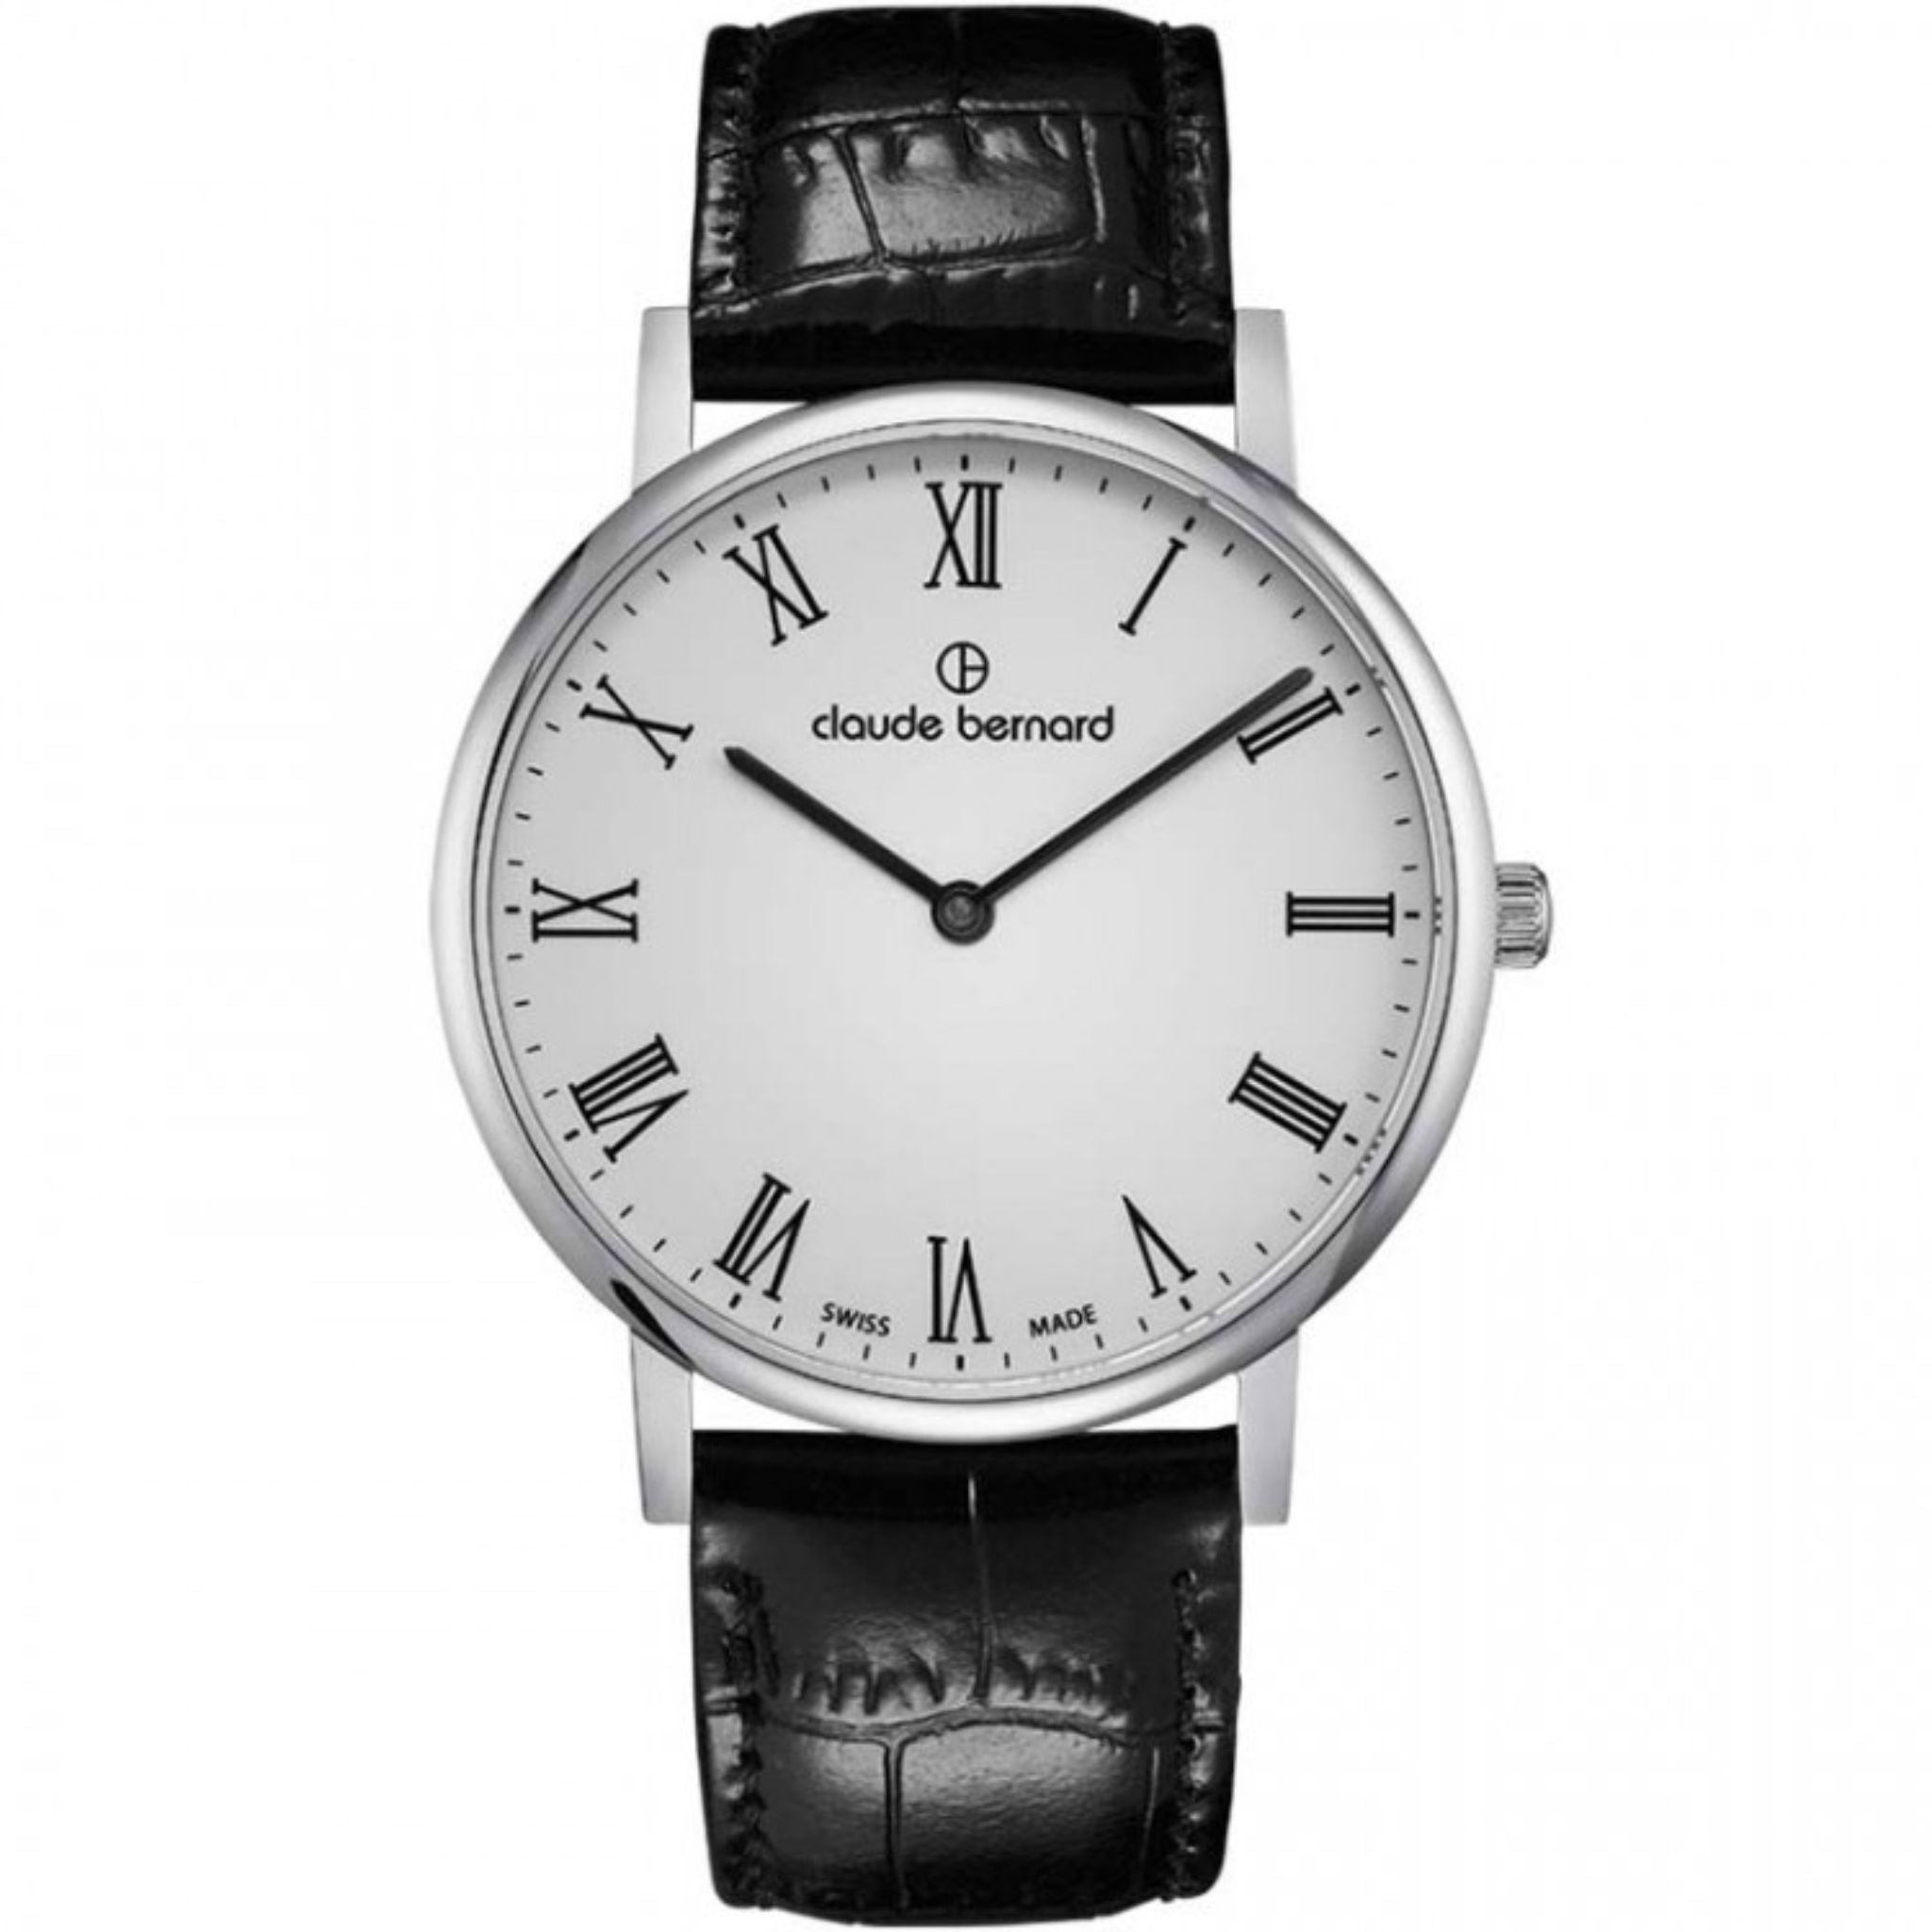 IWC Watches For Sale : New and Used : BERNARD WATCH